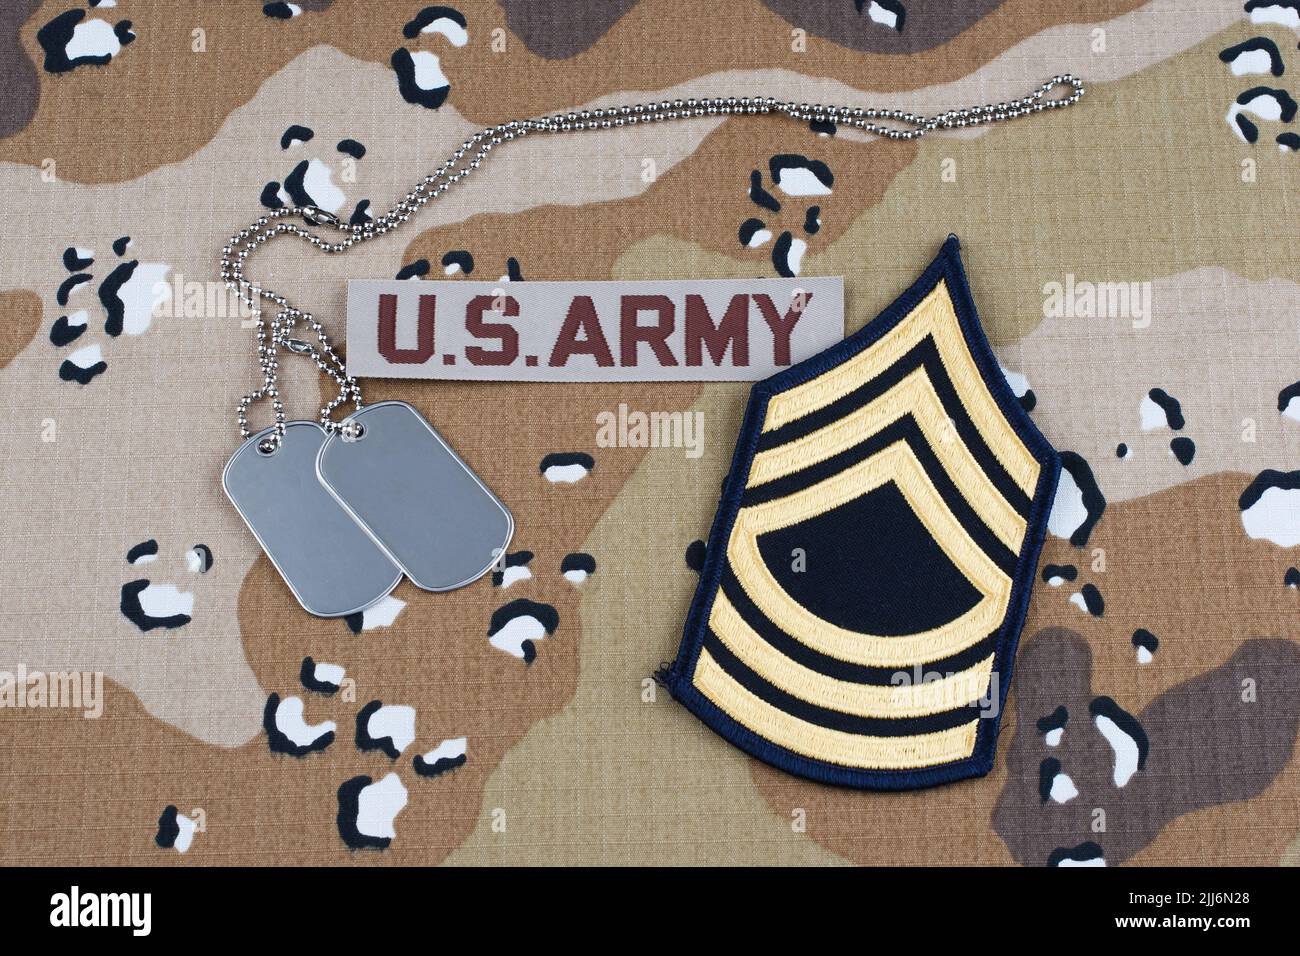 May 12, 2018. US ARMY Master Sergeant rank patch and dog tags on Desert Battle Dress Uniform Stock Photo